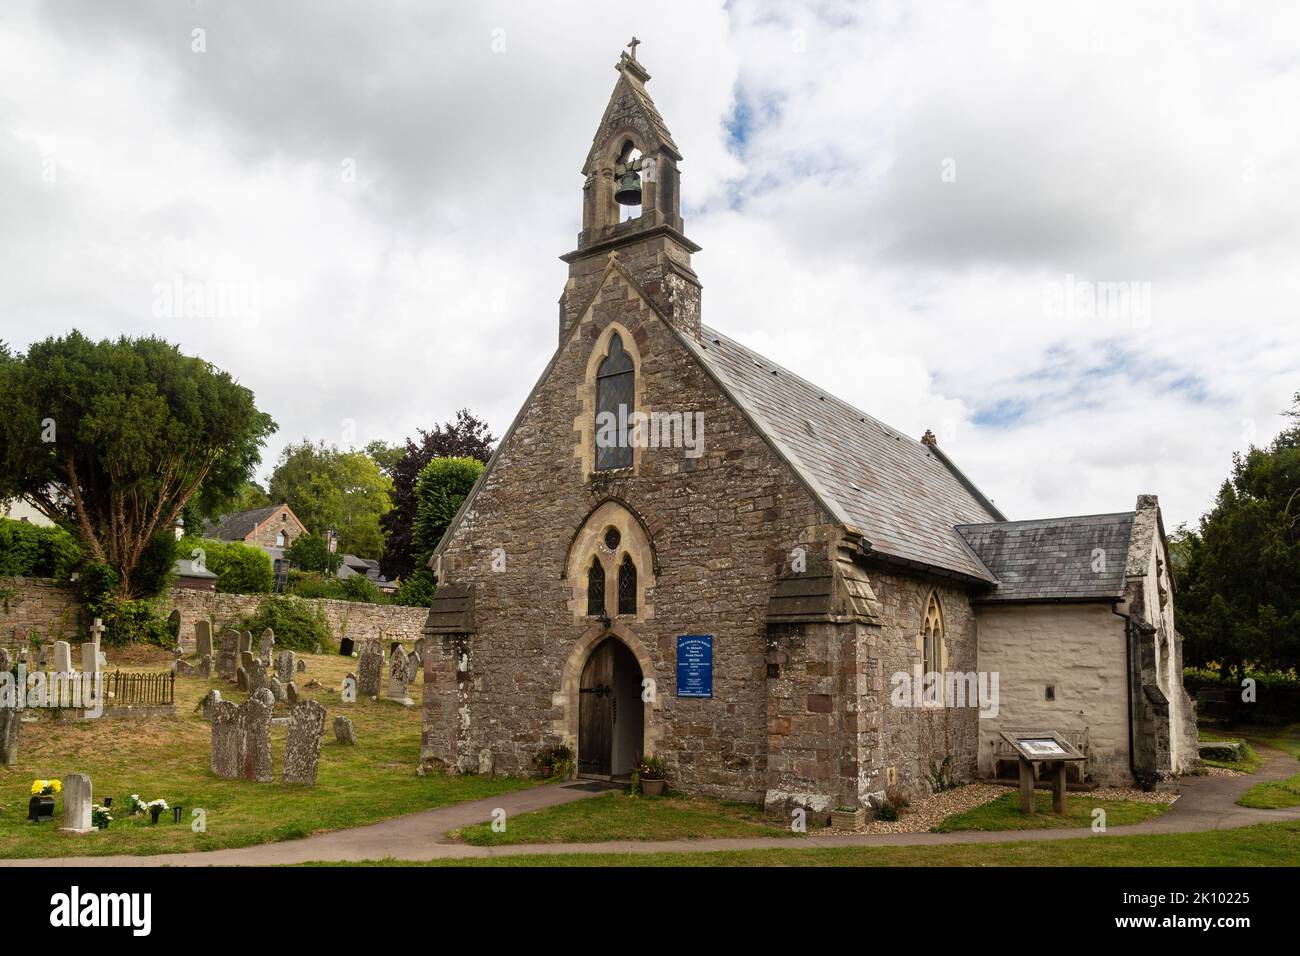 St. Michael's Chruch, Tintern, Monmouthshire, Wales Stock Photo